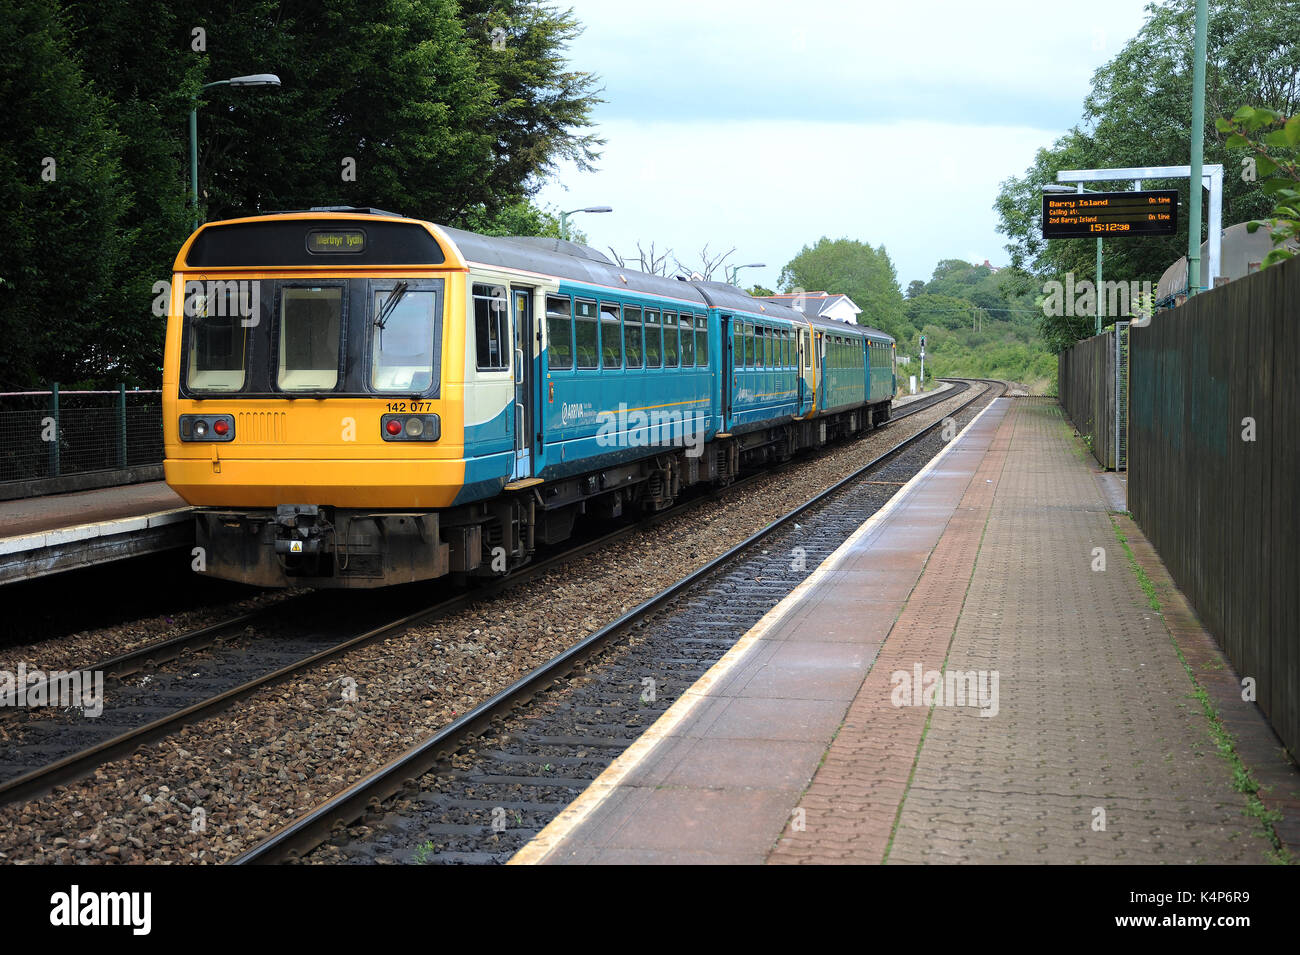 142077 (nearest camera) and 143625 at Eastbrook station with a service for Merthyr Tydfil. Stock Photo